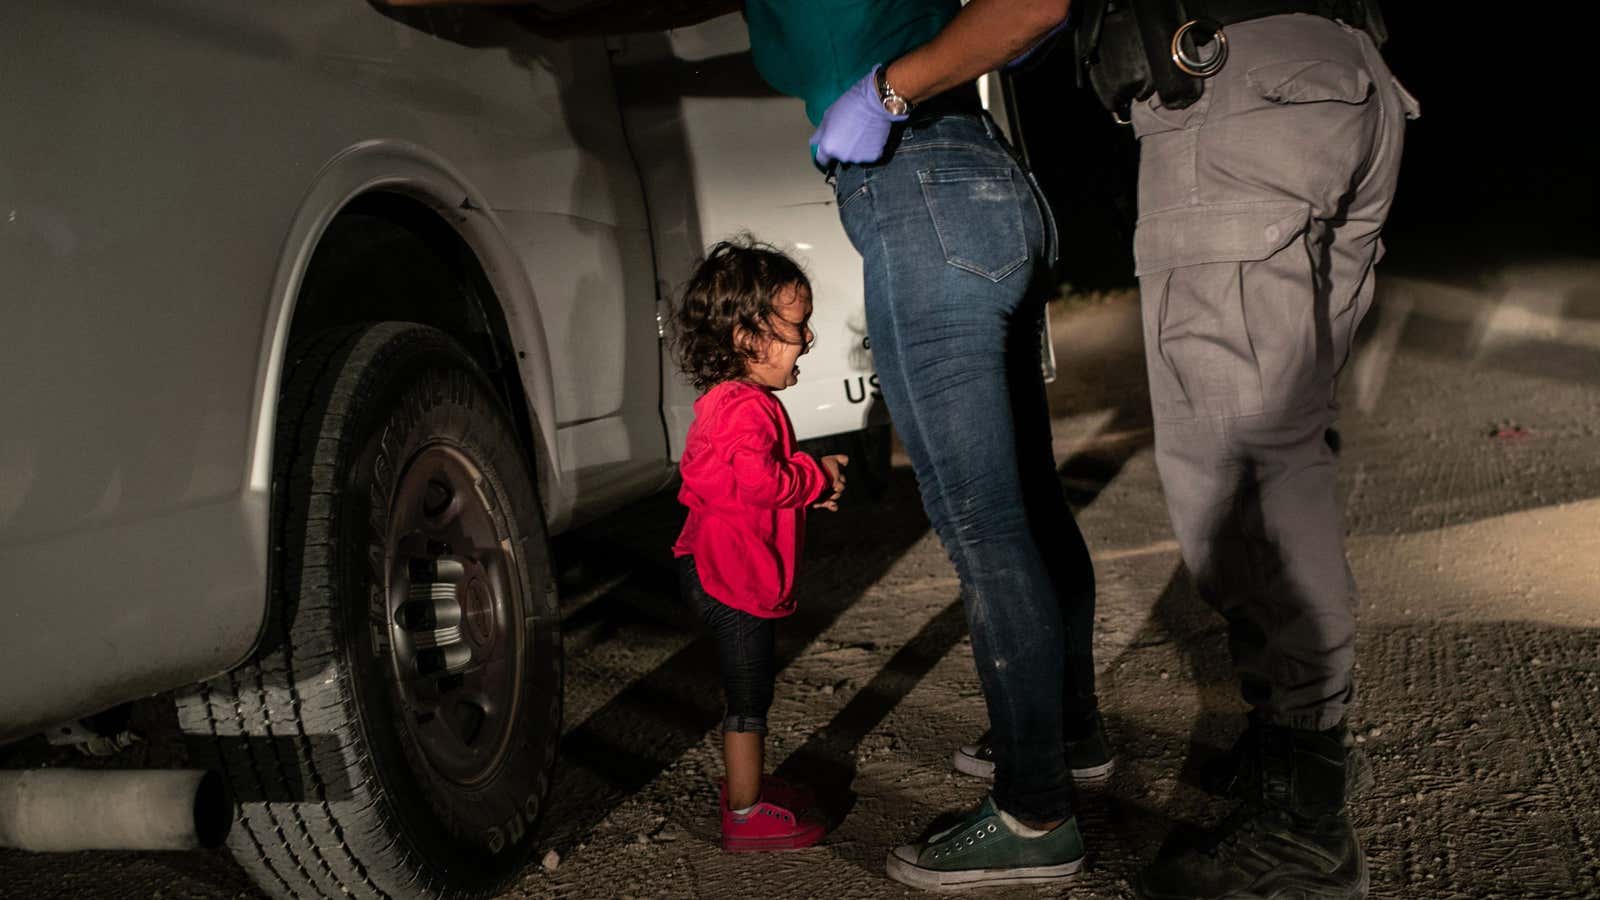 A terrifying moment for a mother and child embodied the Trump administration’s punitive “zero-tolerance” policy.